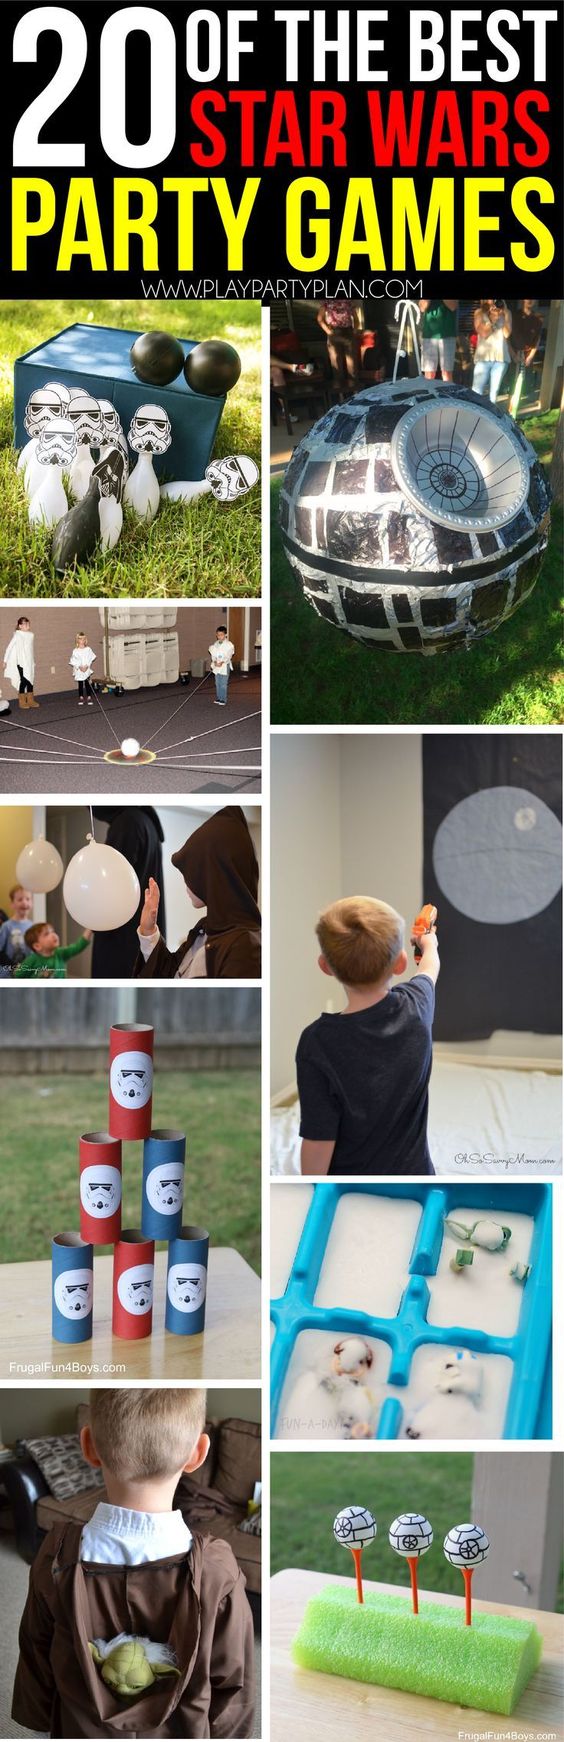 Star Wars Party Games for Father's Day